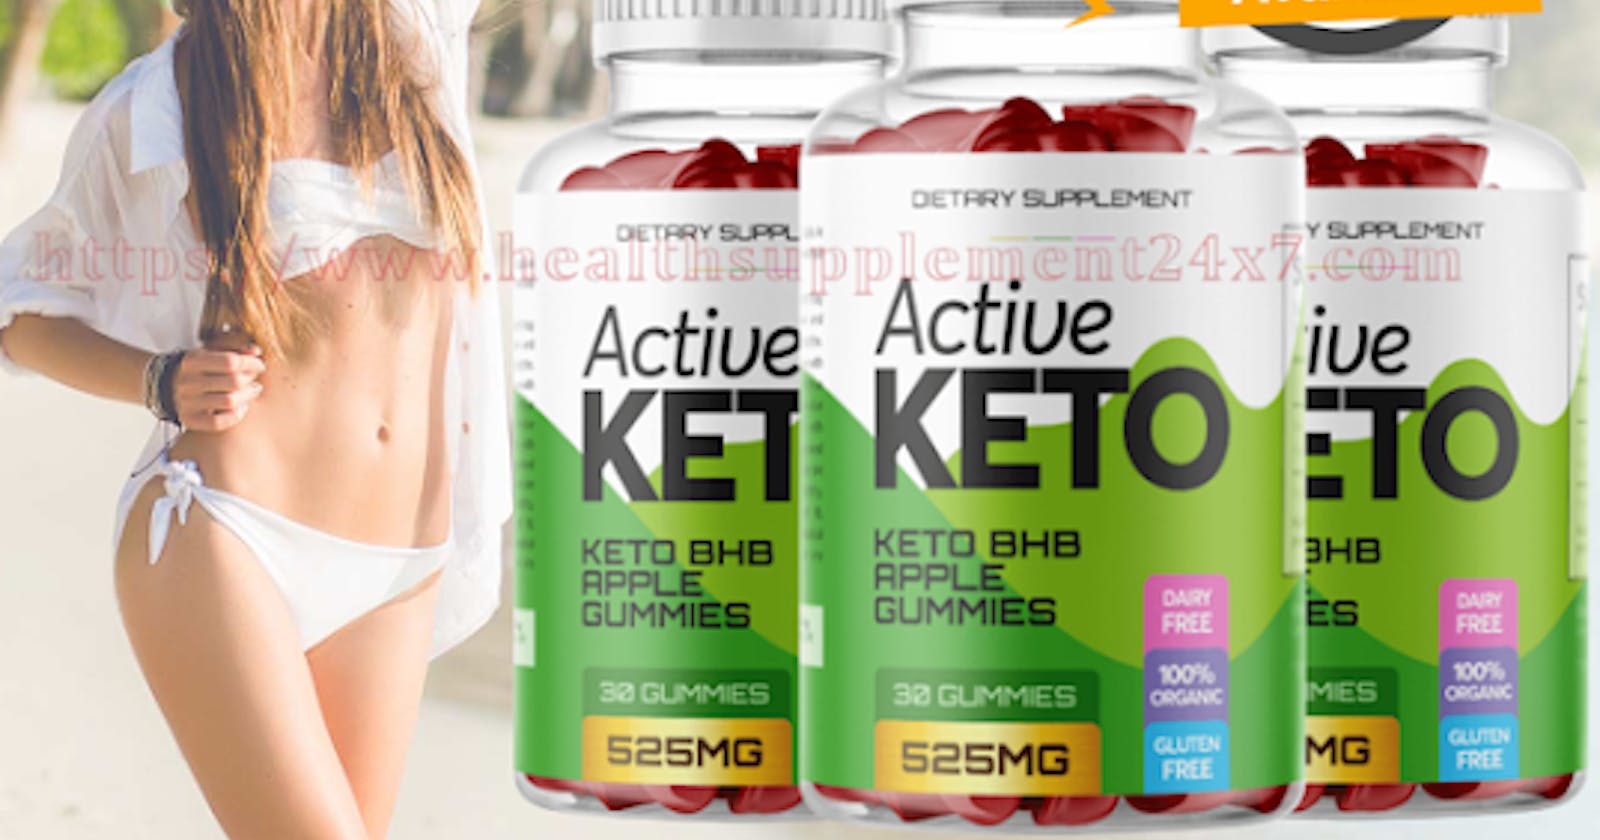 Truly Keto Gummies Reviews, Benefits, and Side Effects?